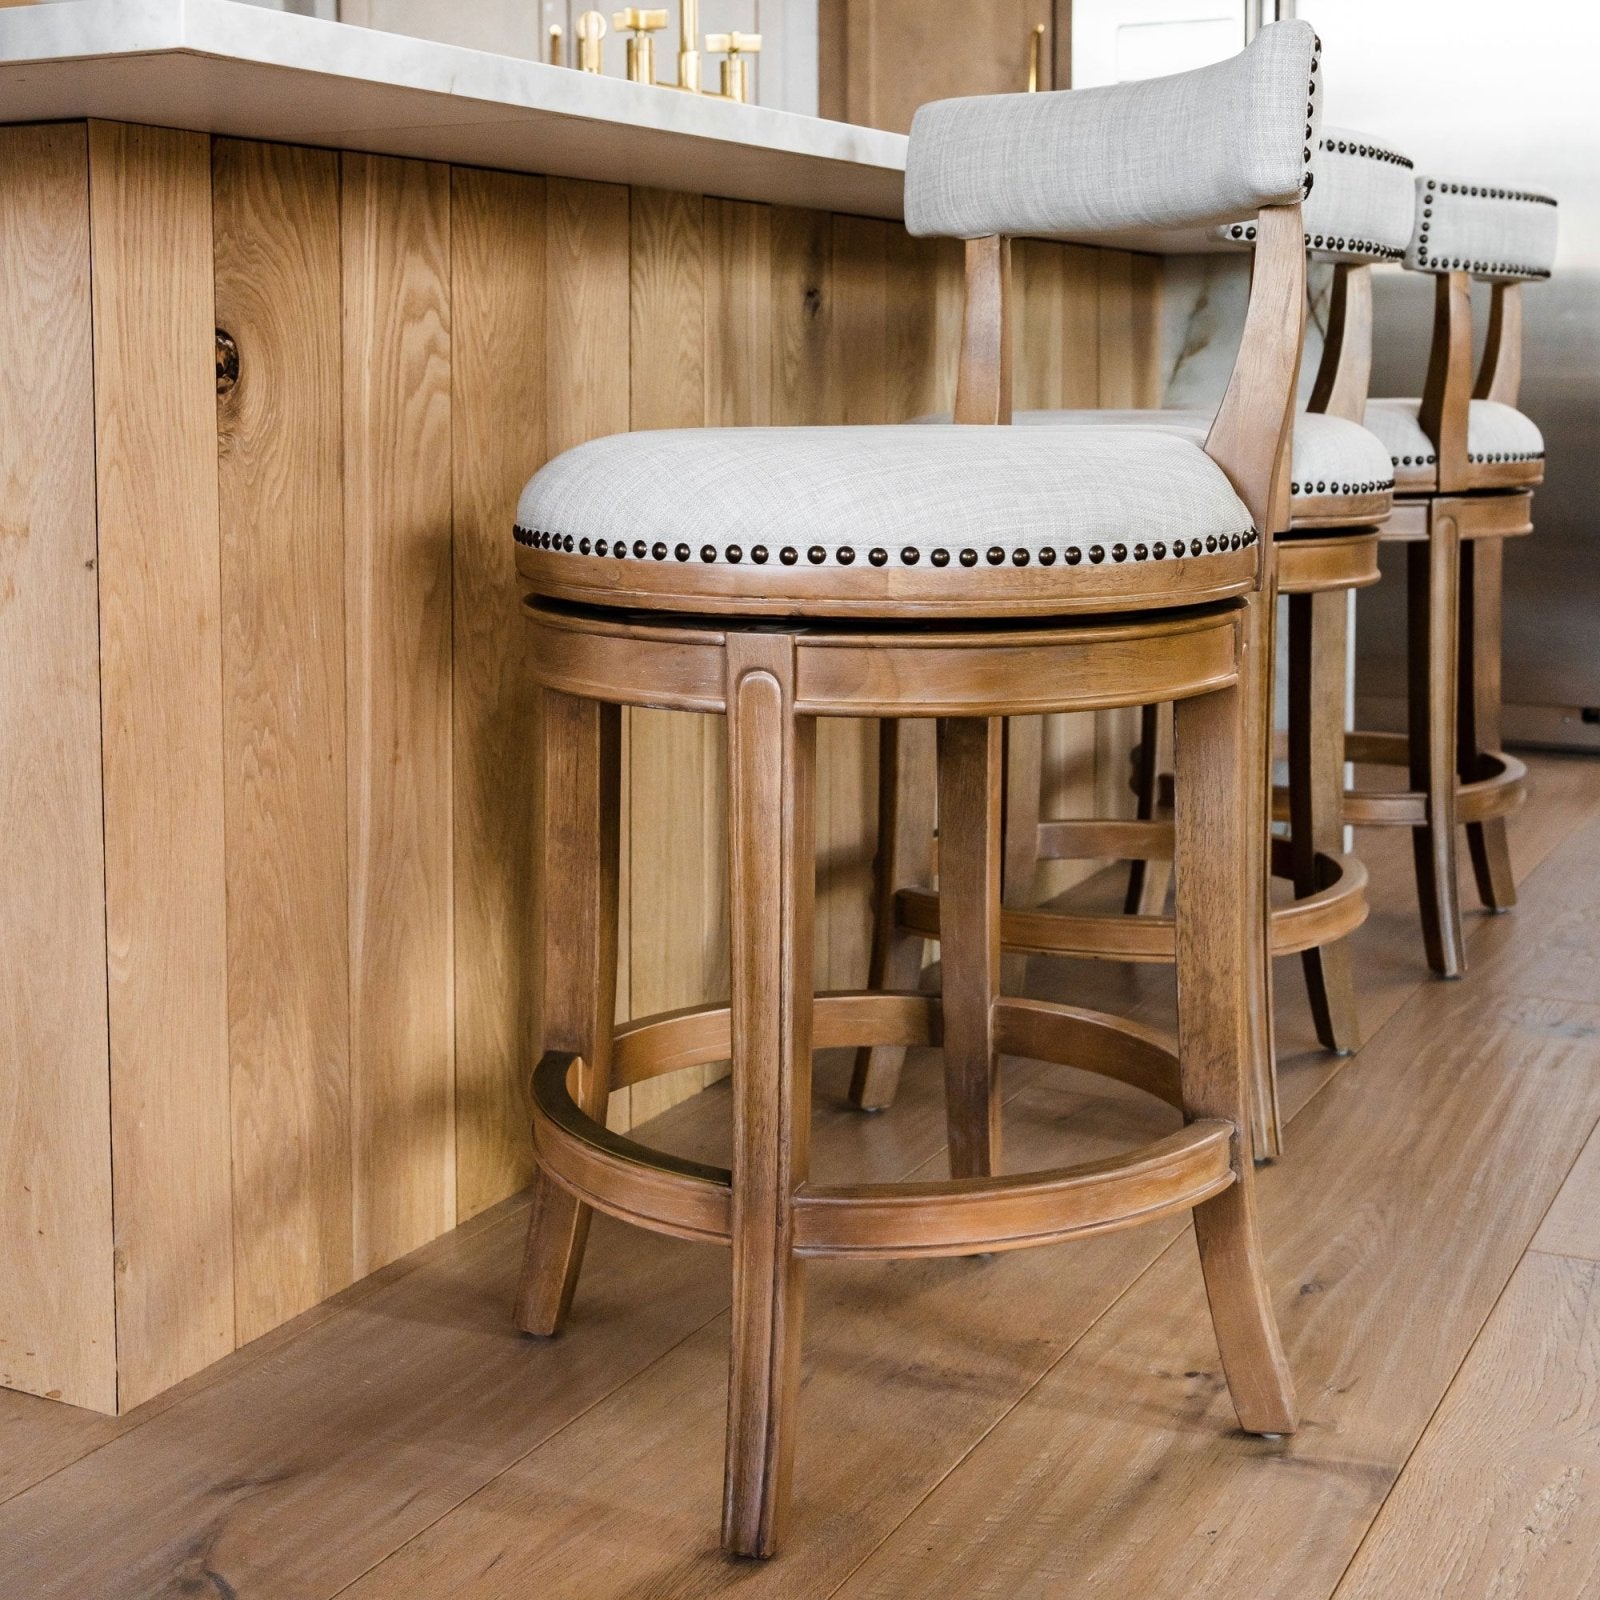 Alexander Bar Stool in Weathered Oak Finish with Sand Color Fabric Upholstery in Stools by Maven Lane